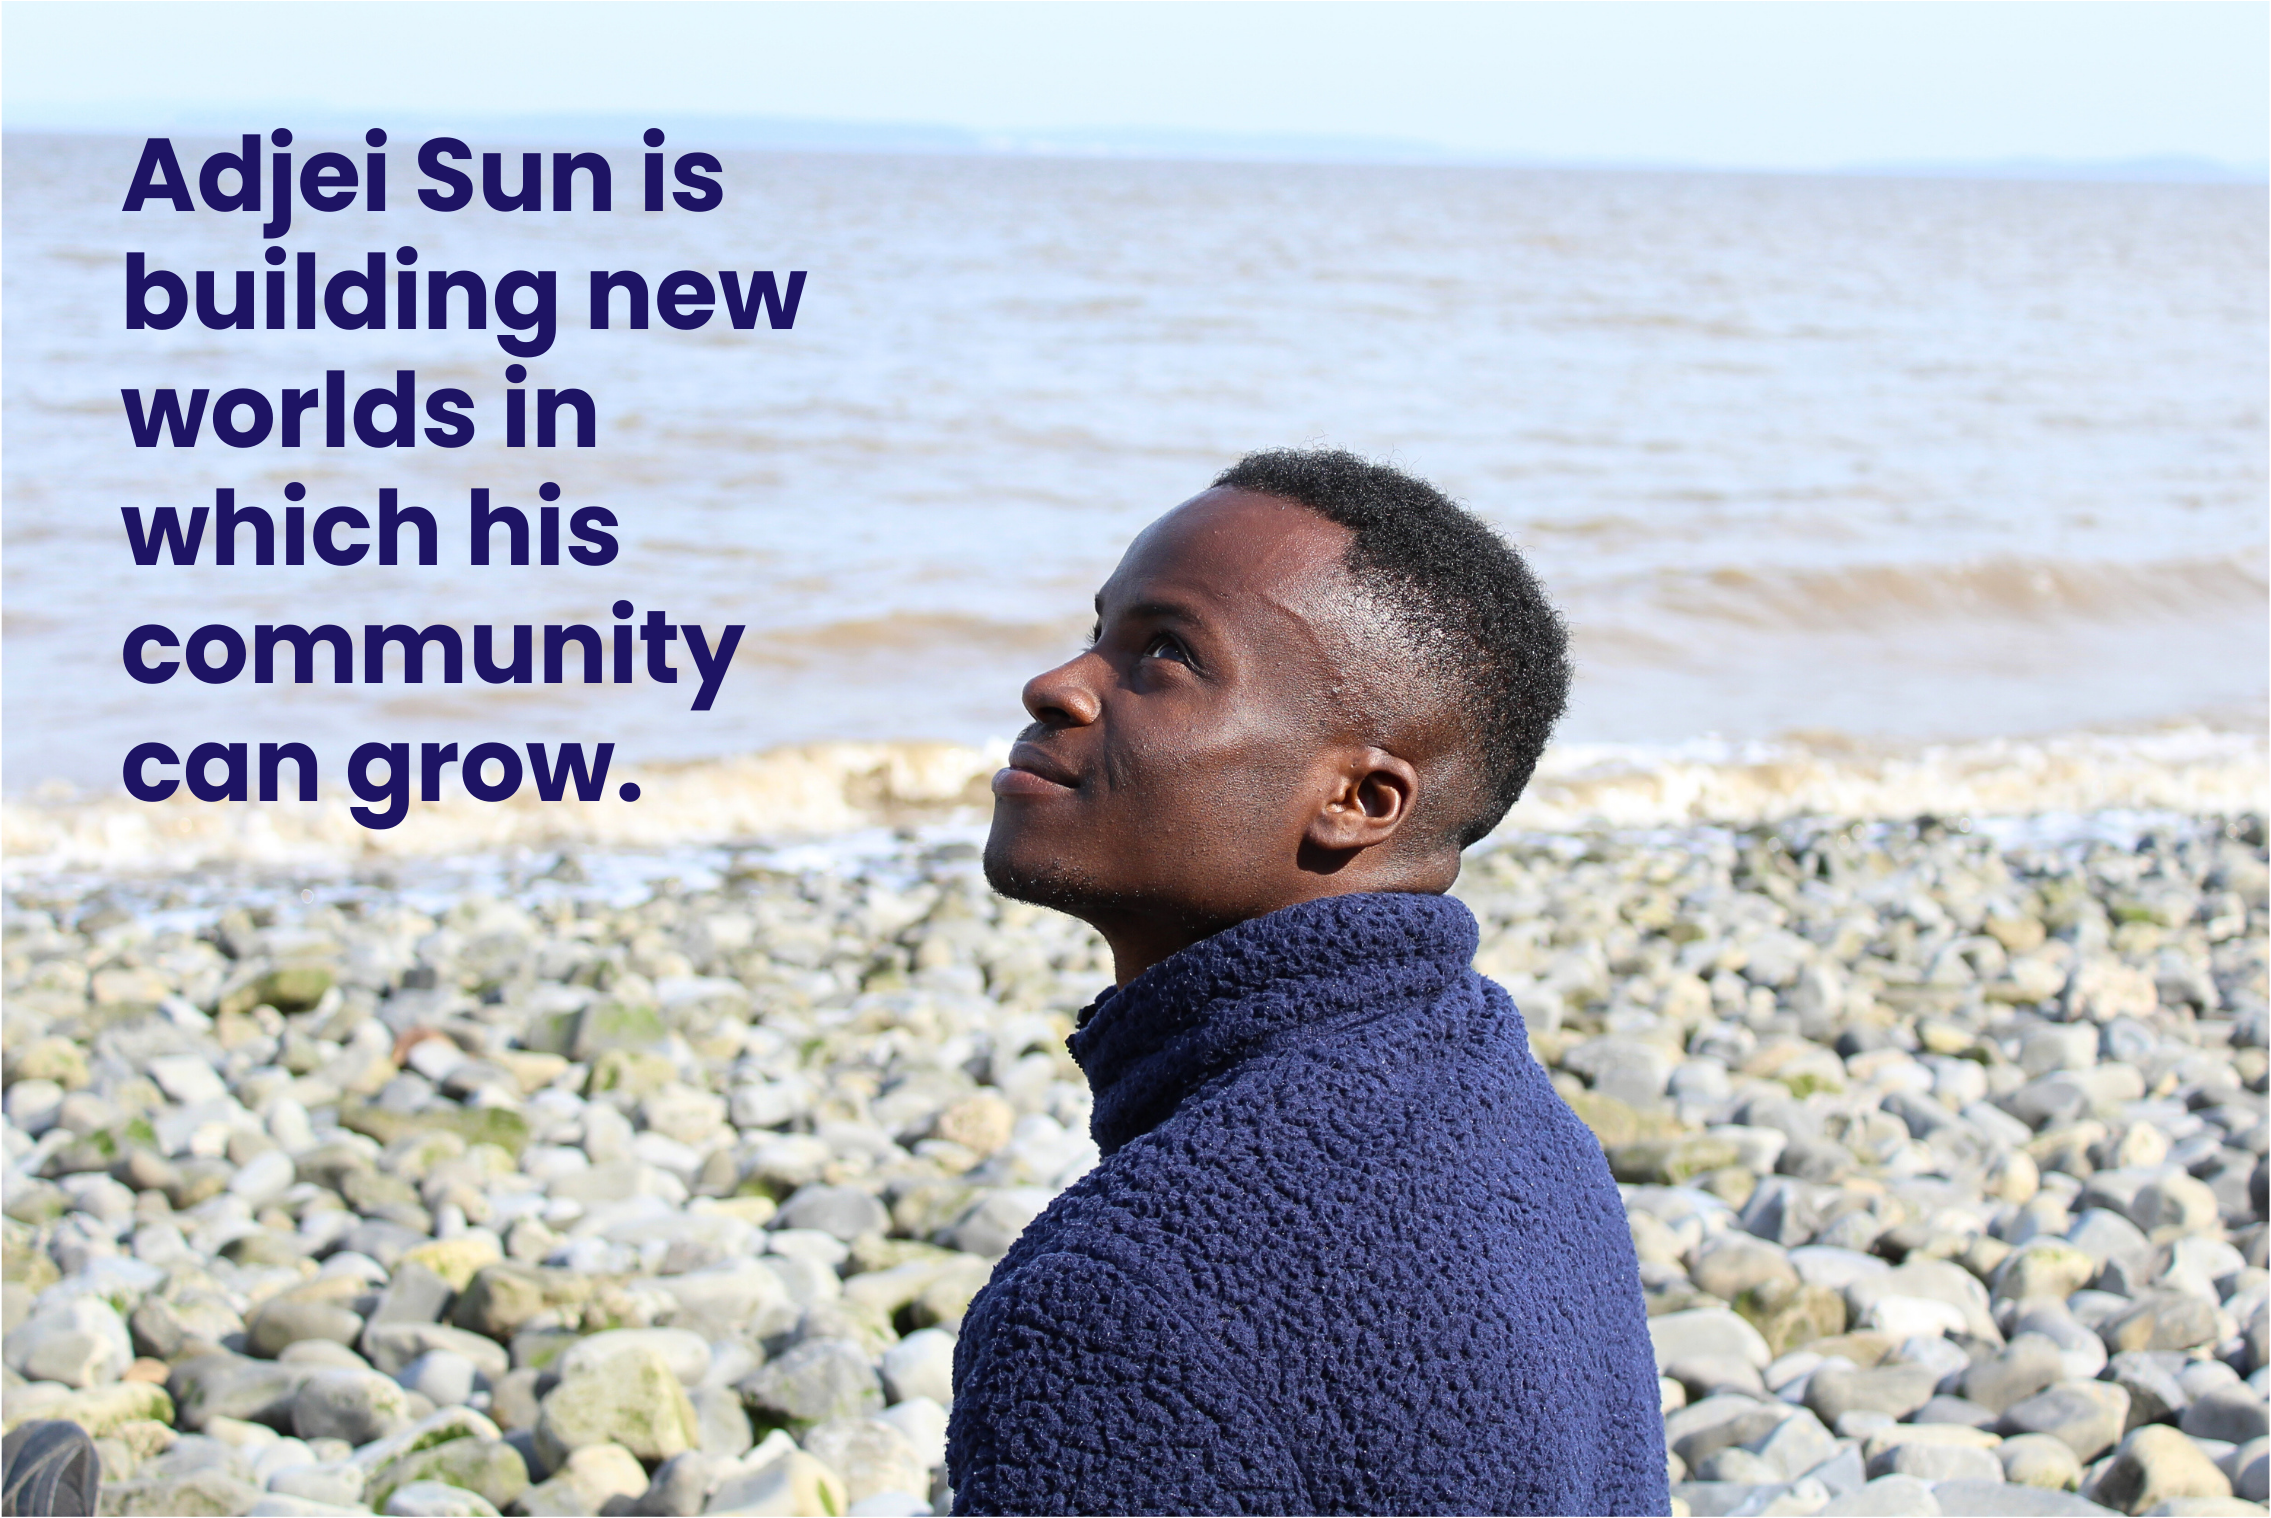 Adjei looking up at the sky. Text - Adjei Sun is building new worlds in which his community can grow. 